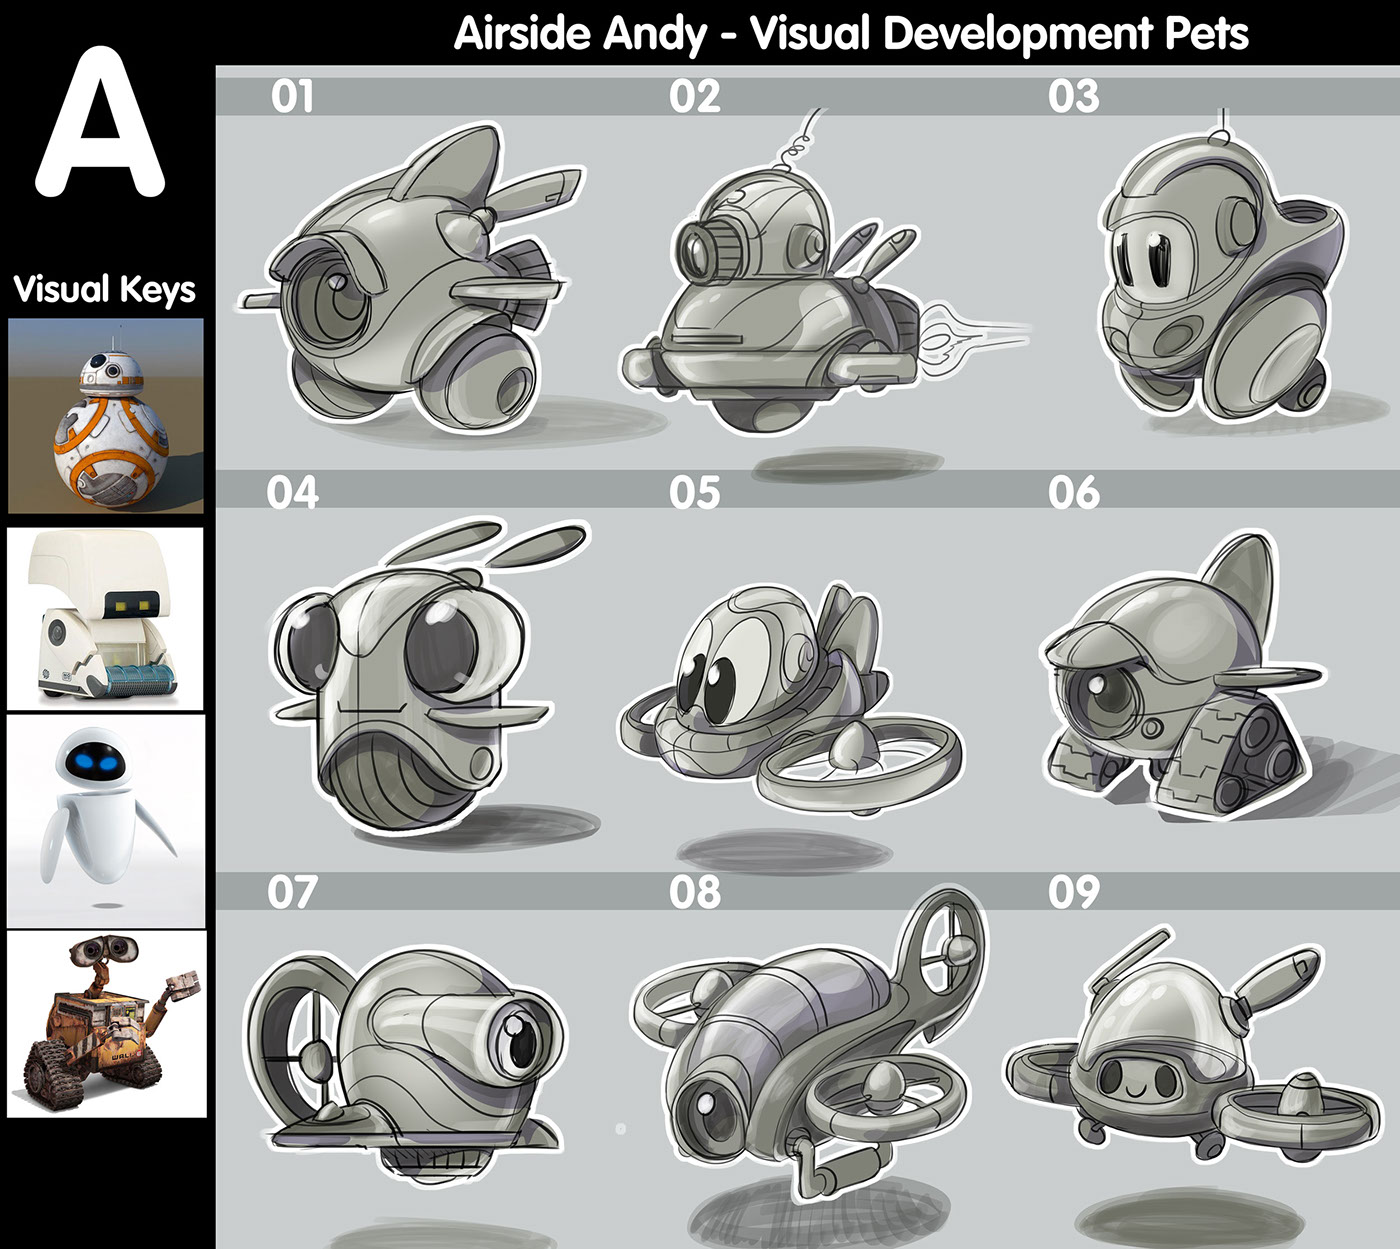 Adobe Portfolio Airside Andy Games concept art props characters environments Visual Development